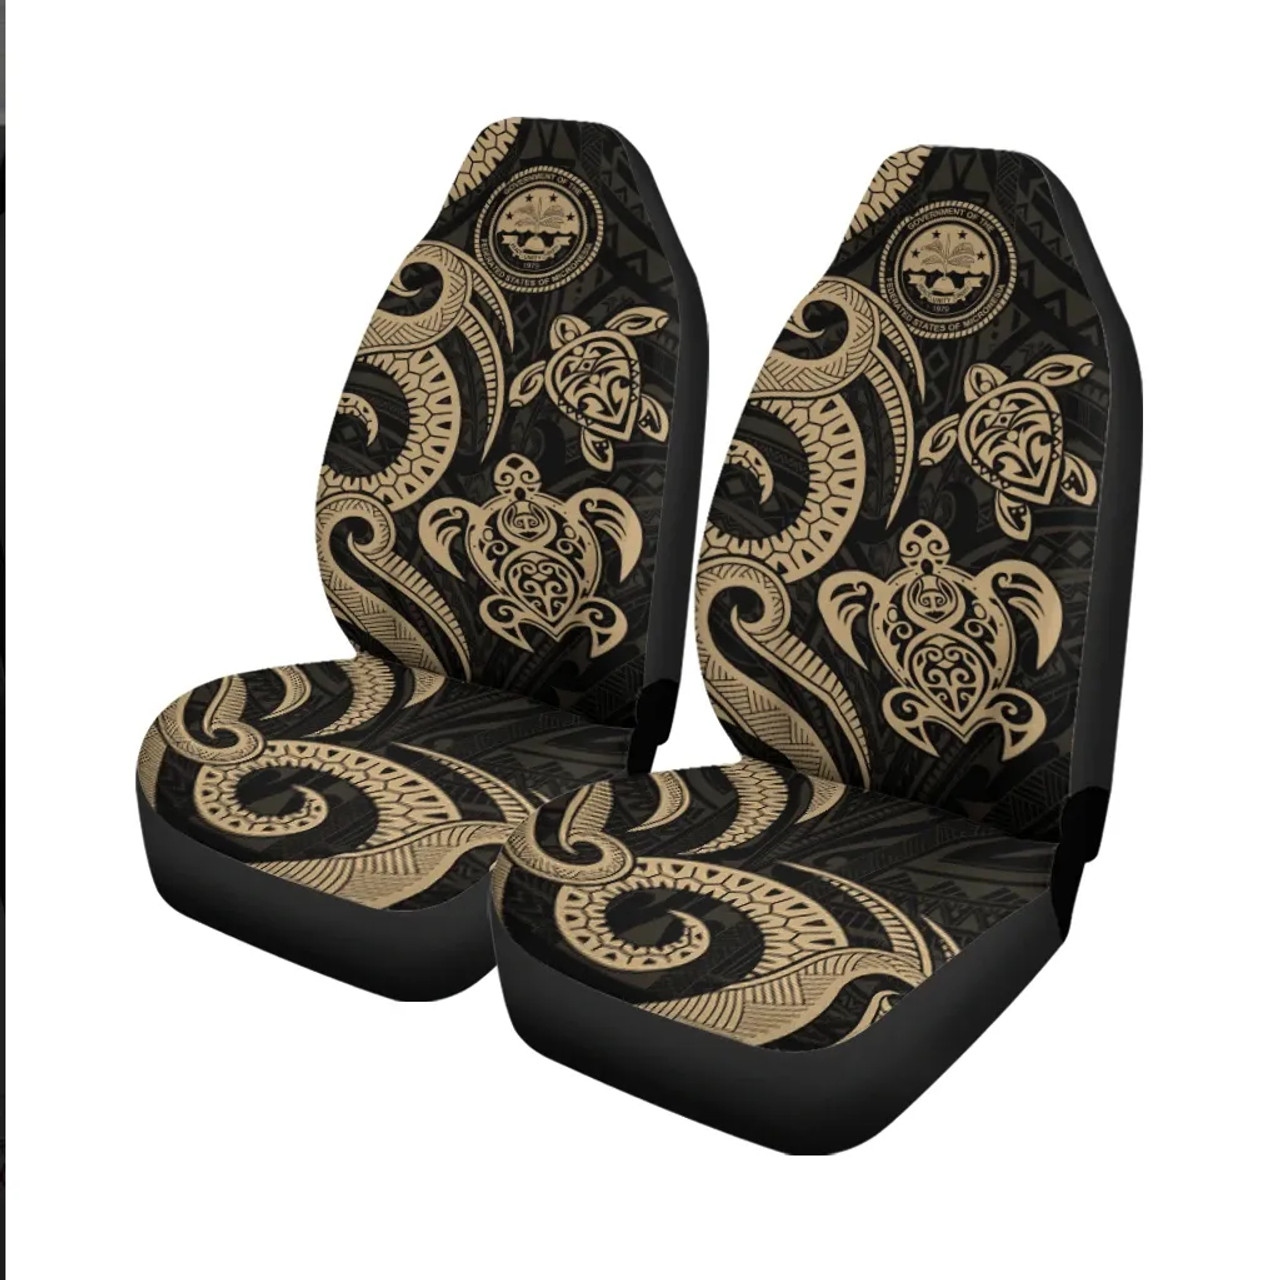 Federated States of Micronesia Car Seat Covers - Gold Tentacle Turtle